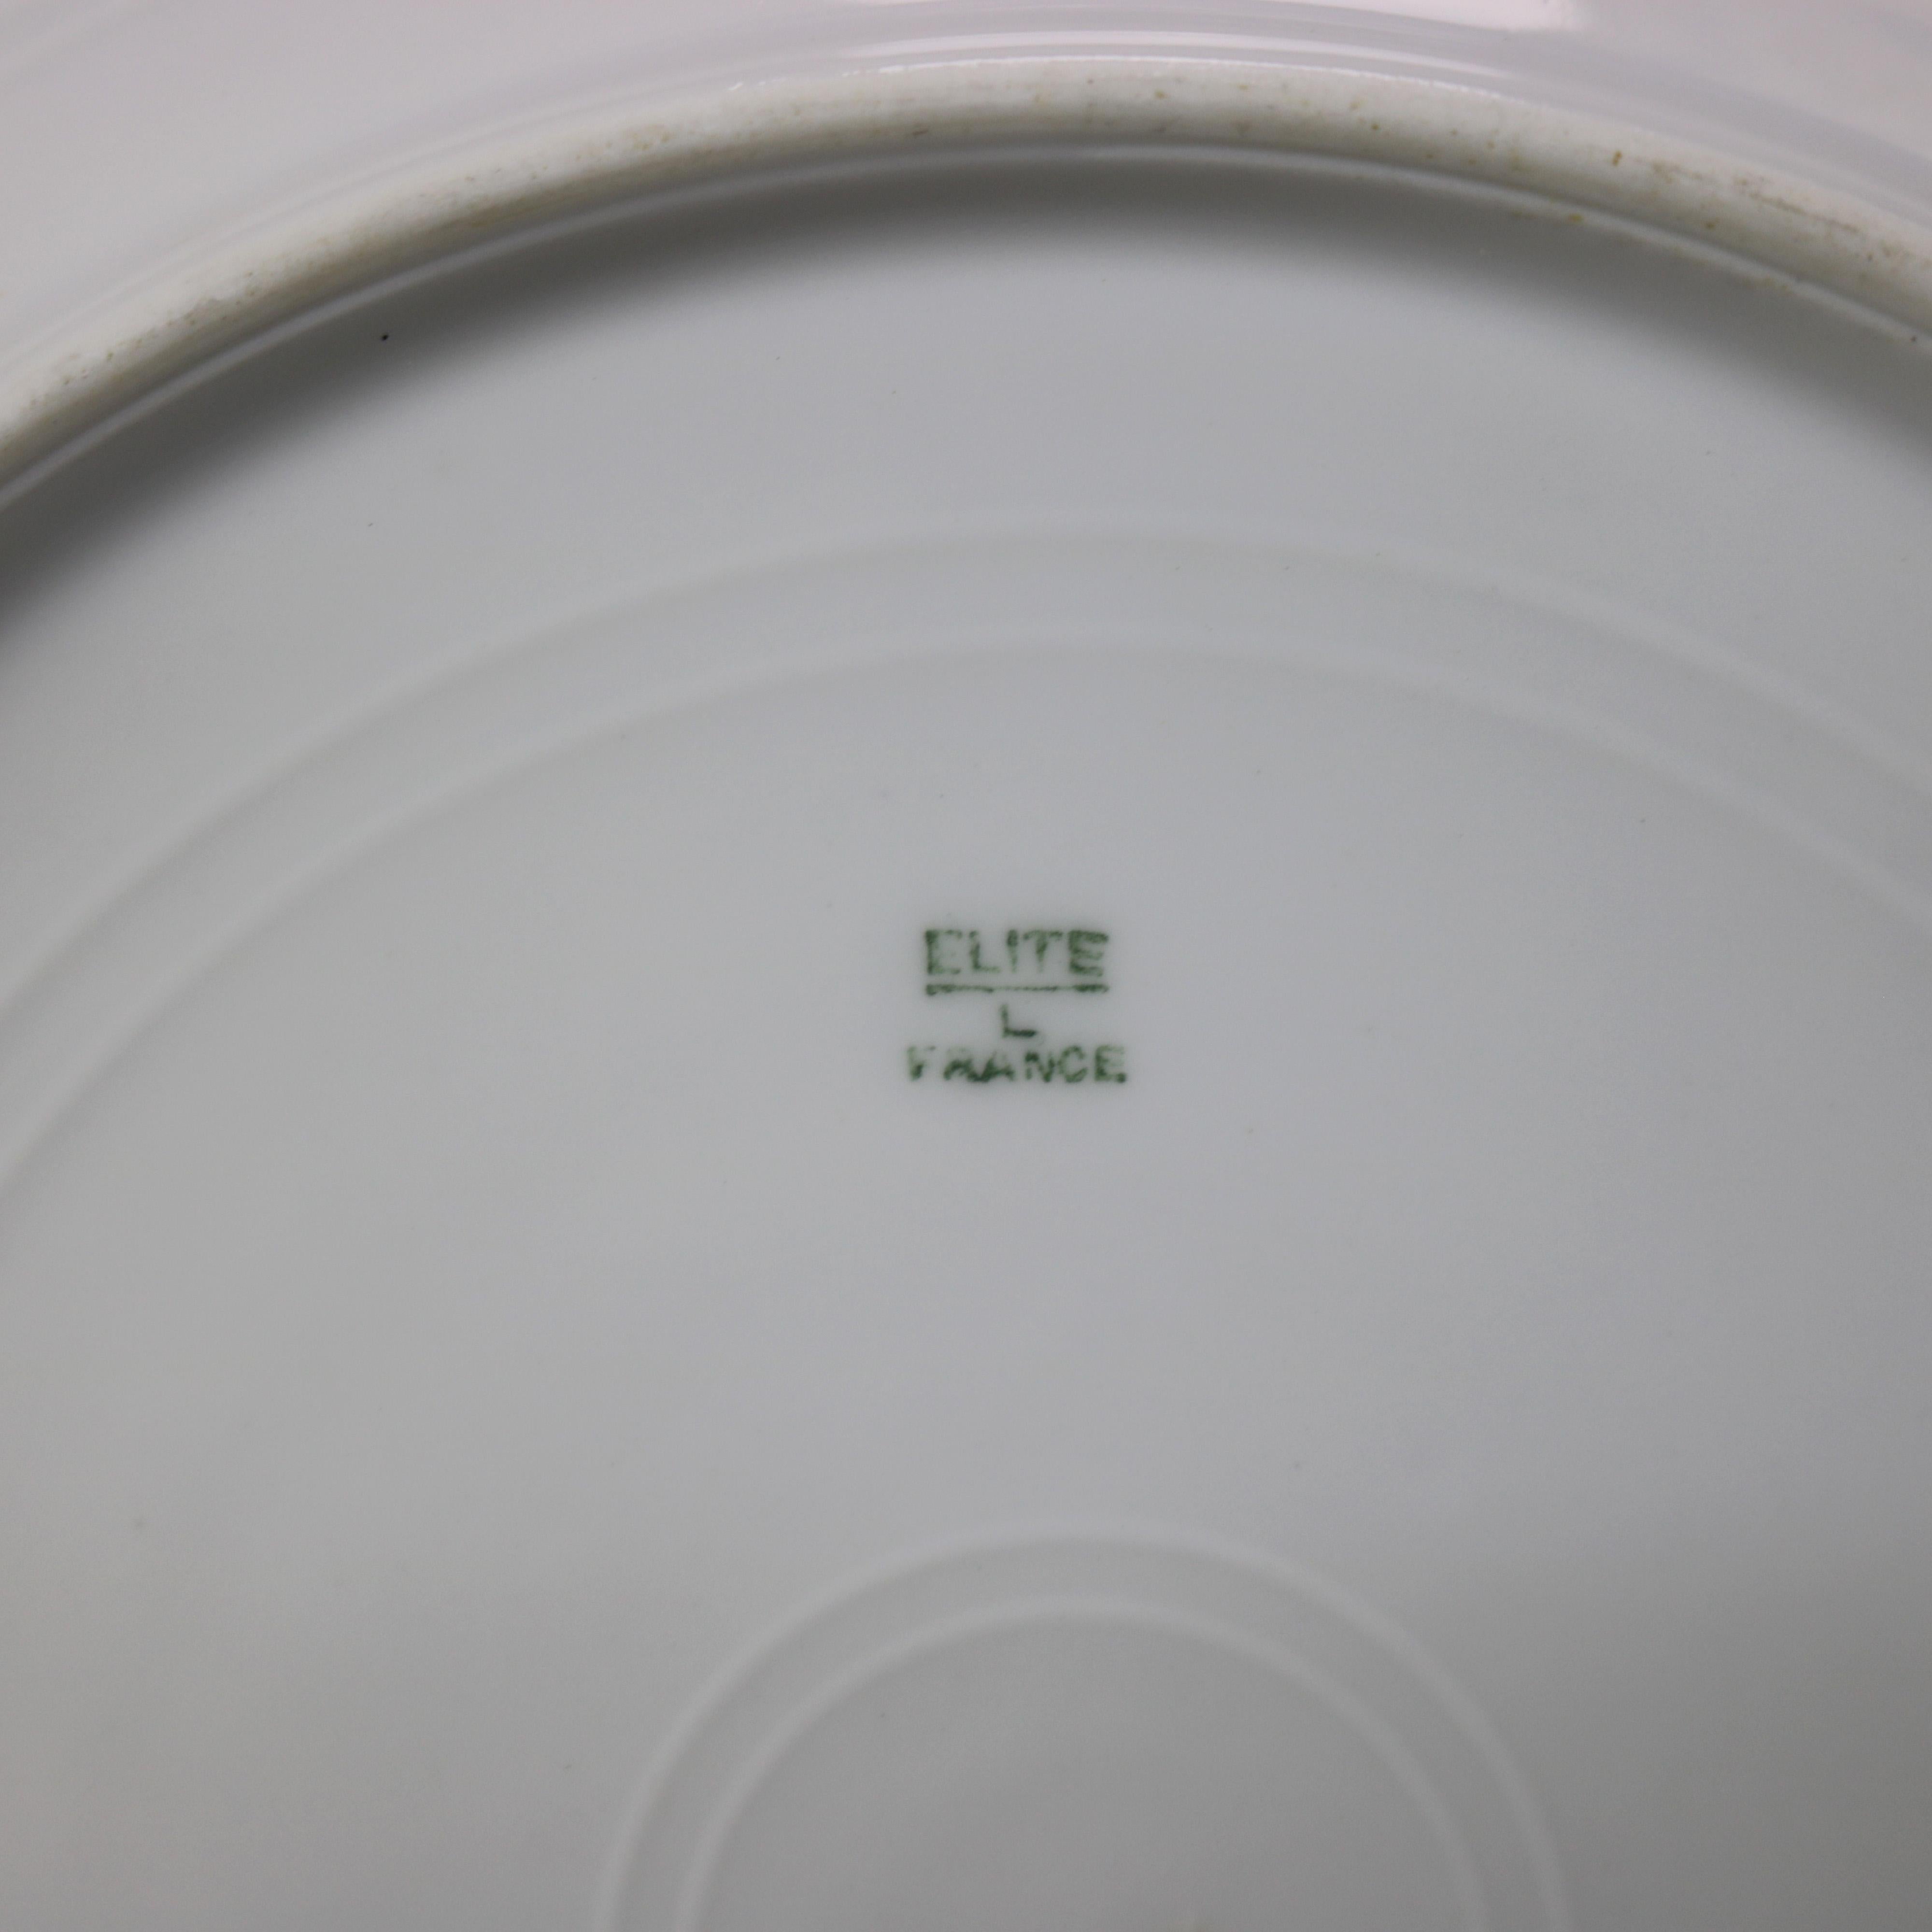 Painted Ten Antique French Elite Works Limoges Dinner Plates, Circa 1900